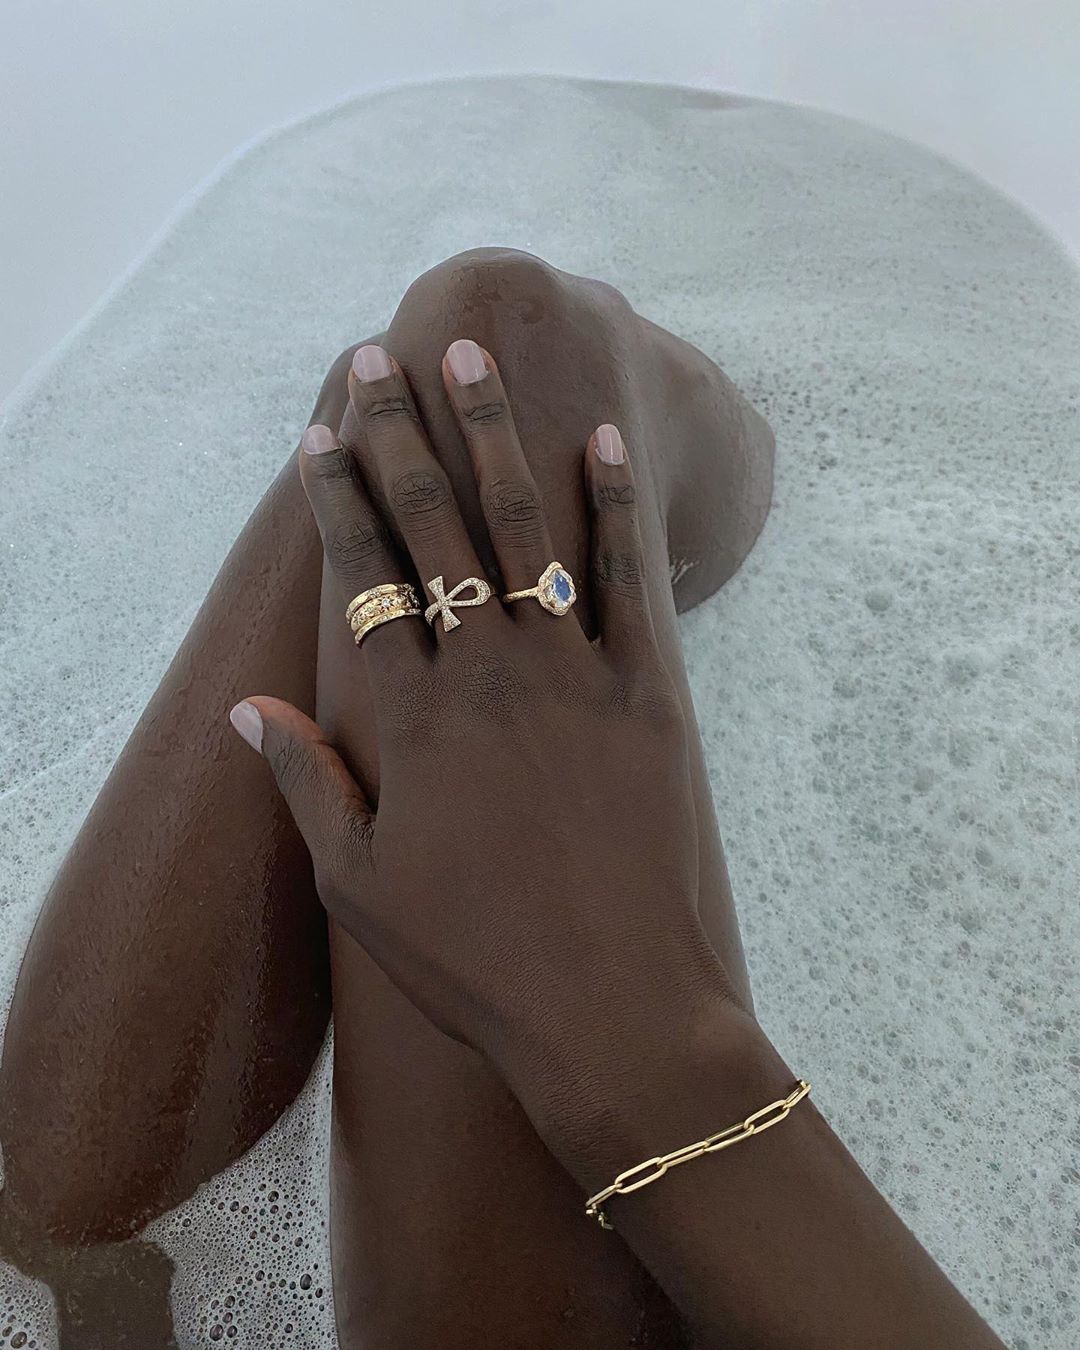 6 Beautiful Nails and Jewellery Pairings We Can’t Stop Staring At